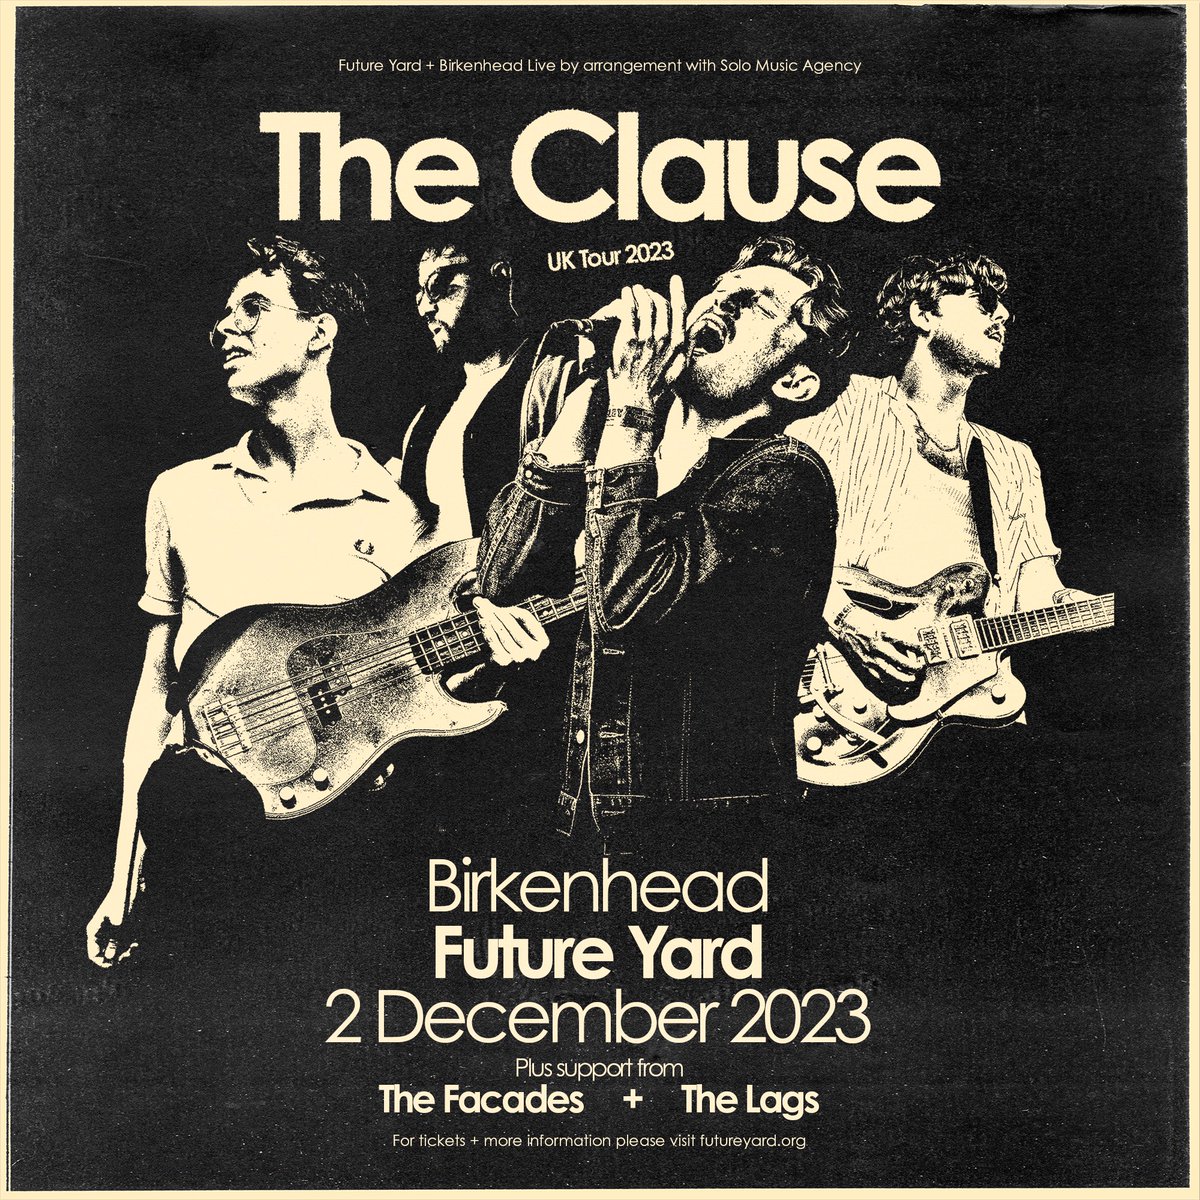 We are back making our debut over the water @future_yard supporting @theclauseuk on Saturday 2nd December! Looking forward to this one - ticket link in bio👊🏼